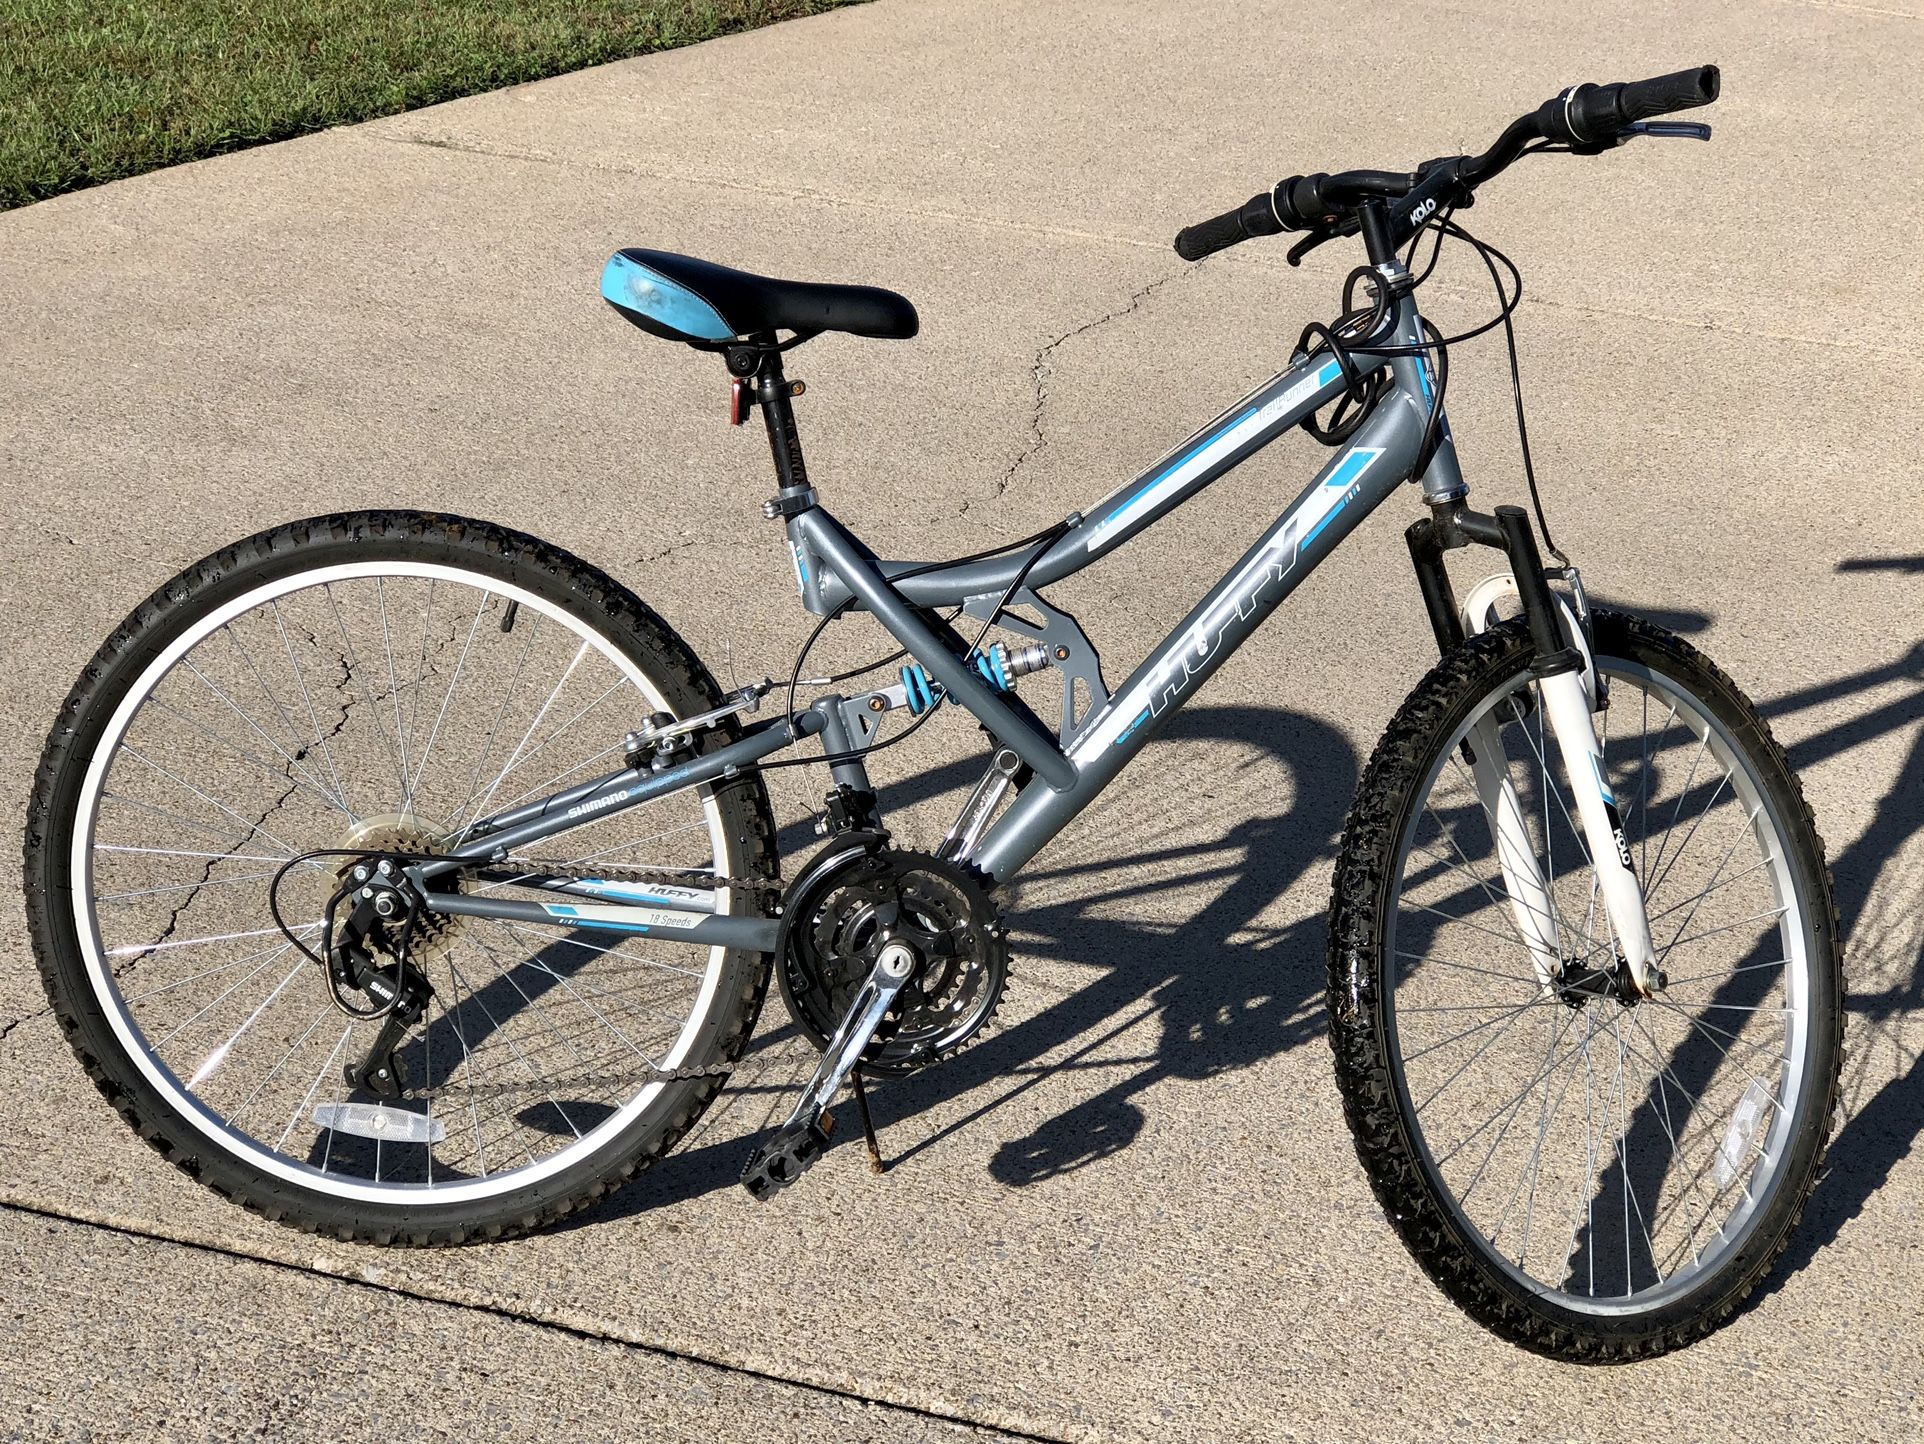 Huffy Trailrunner Mountain Bike 26” 21 speed In excellent condition